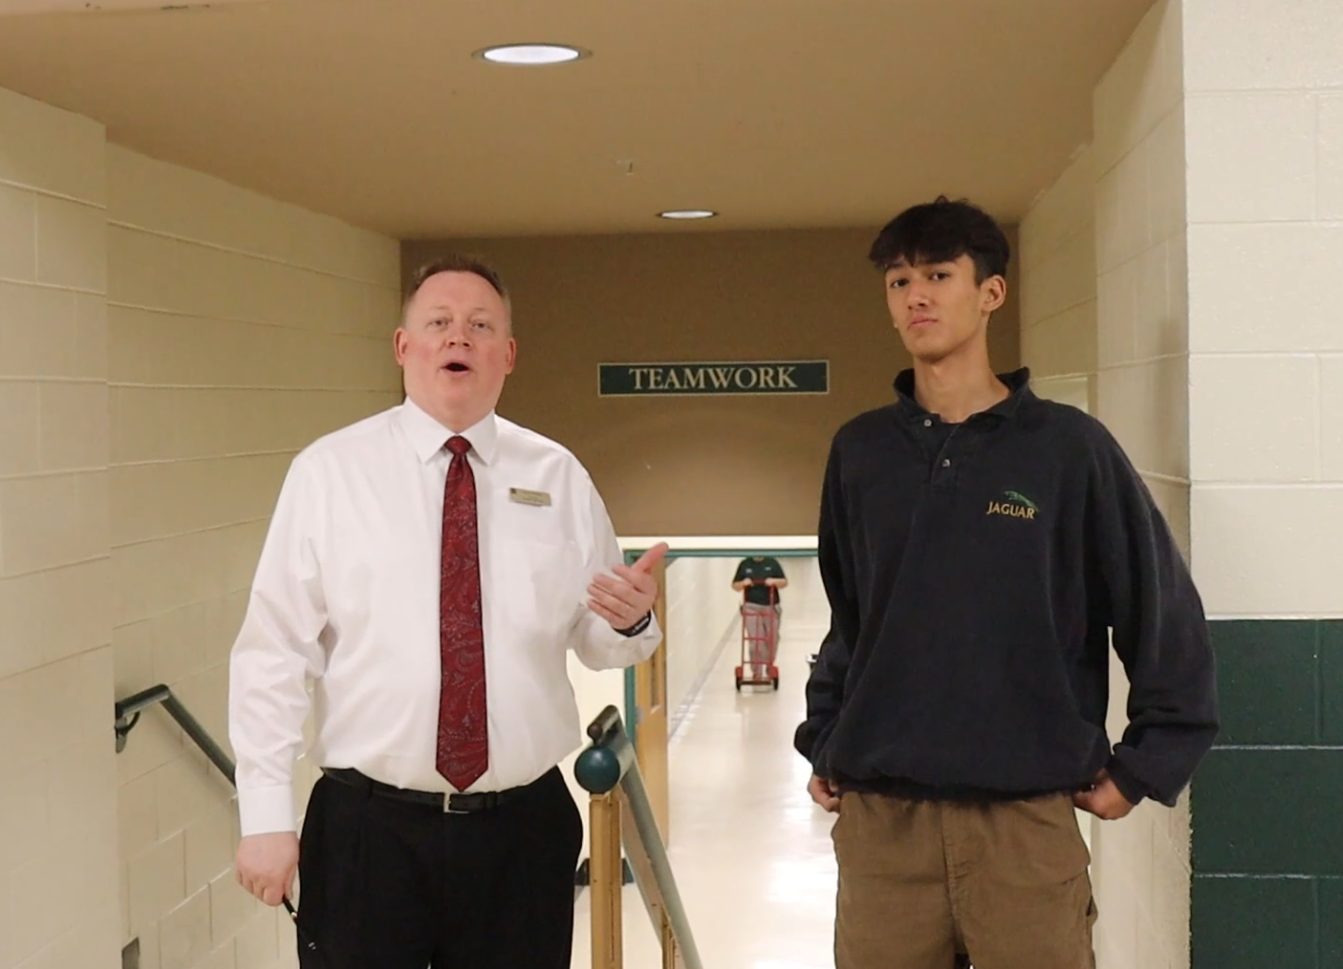 School principal, Chris Chlebek, explains what the E Hallway is used for during Diego Cambrays campus tour.